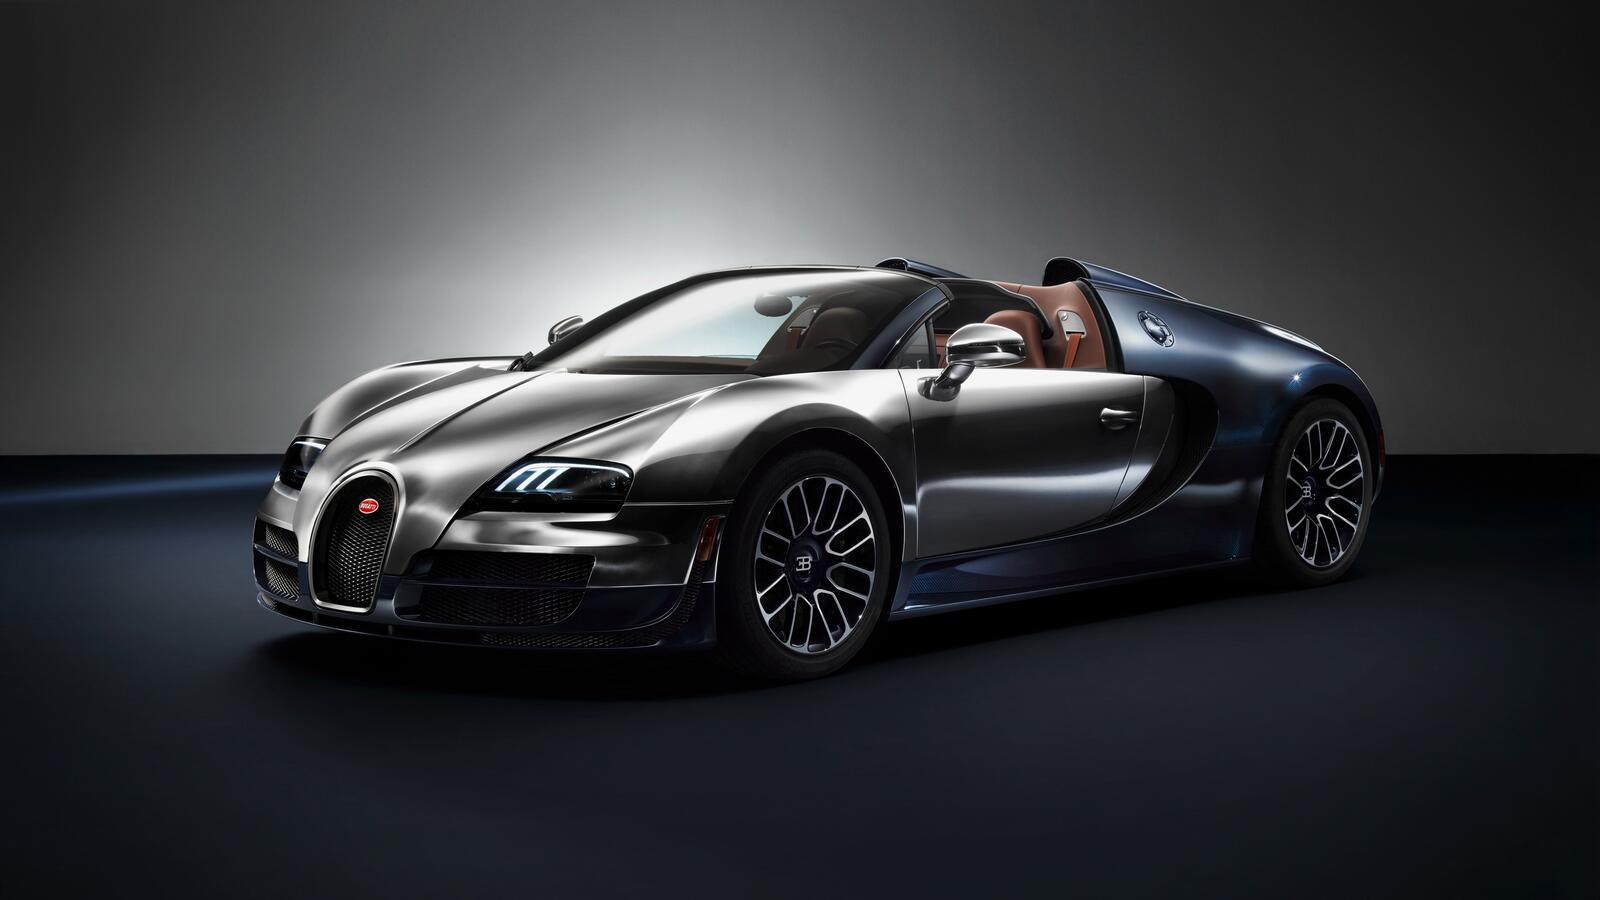 Wallpapers Bugatti Veyron cars coupe on the desktop